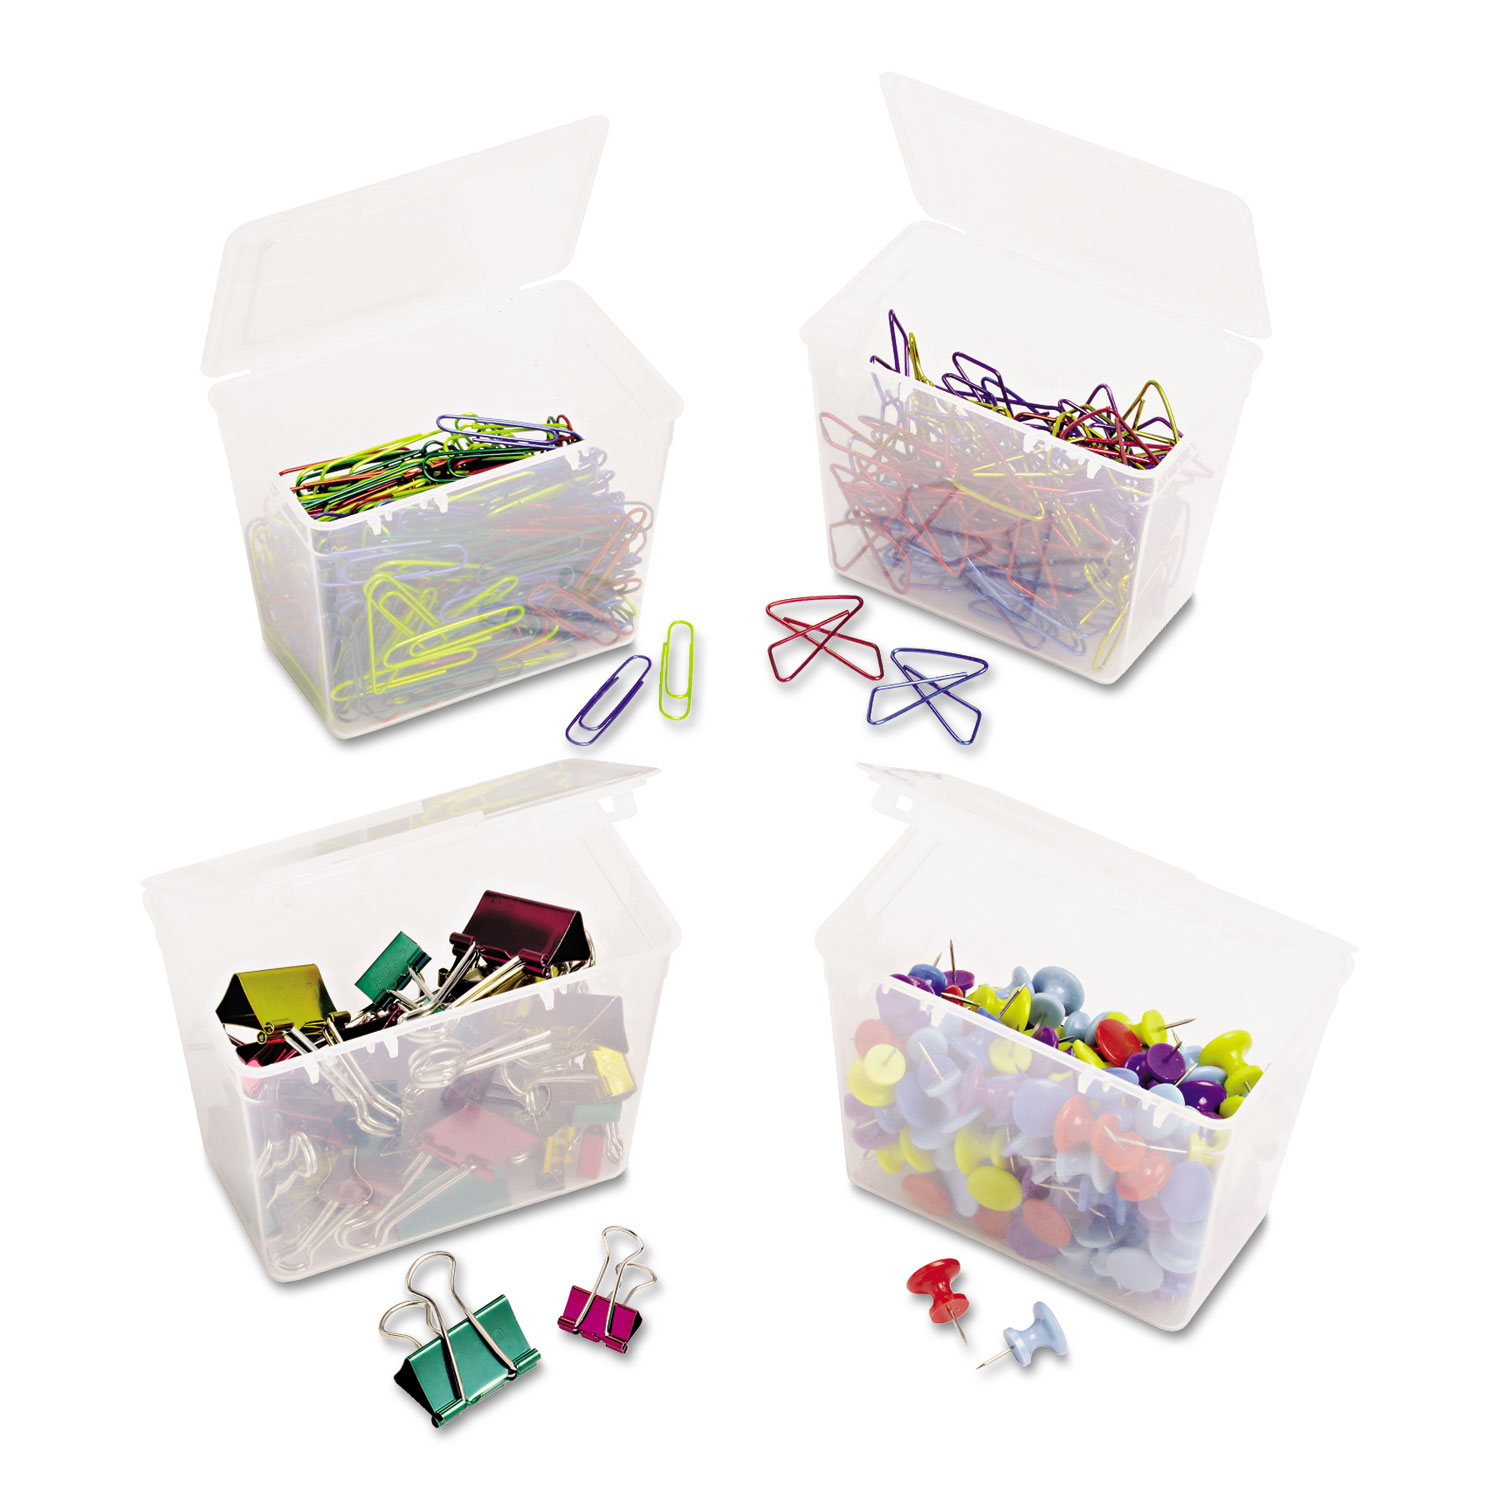 350 Paper Clips, 150 Push Pins, 80 Butterfly Clips and 45 Binder Clips, Assorted